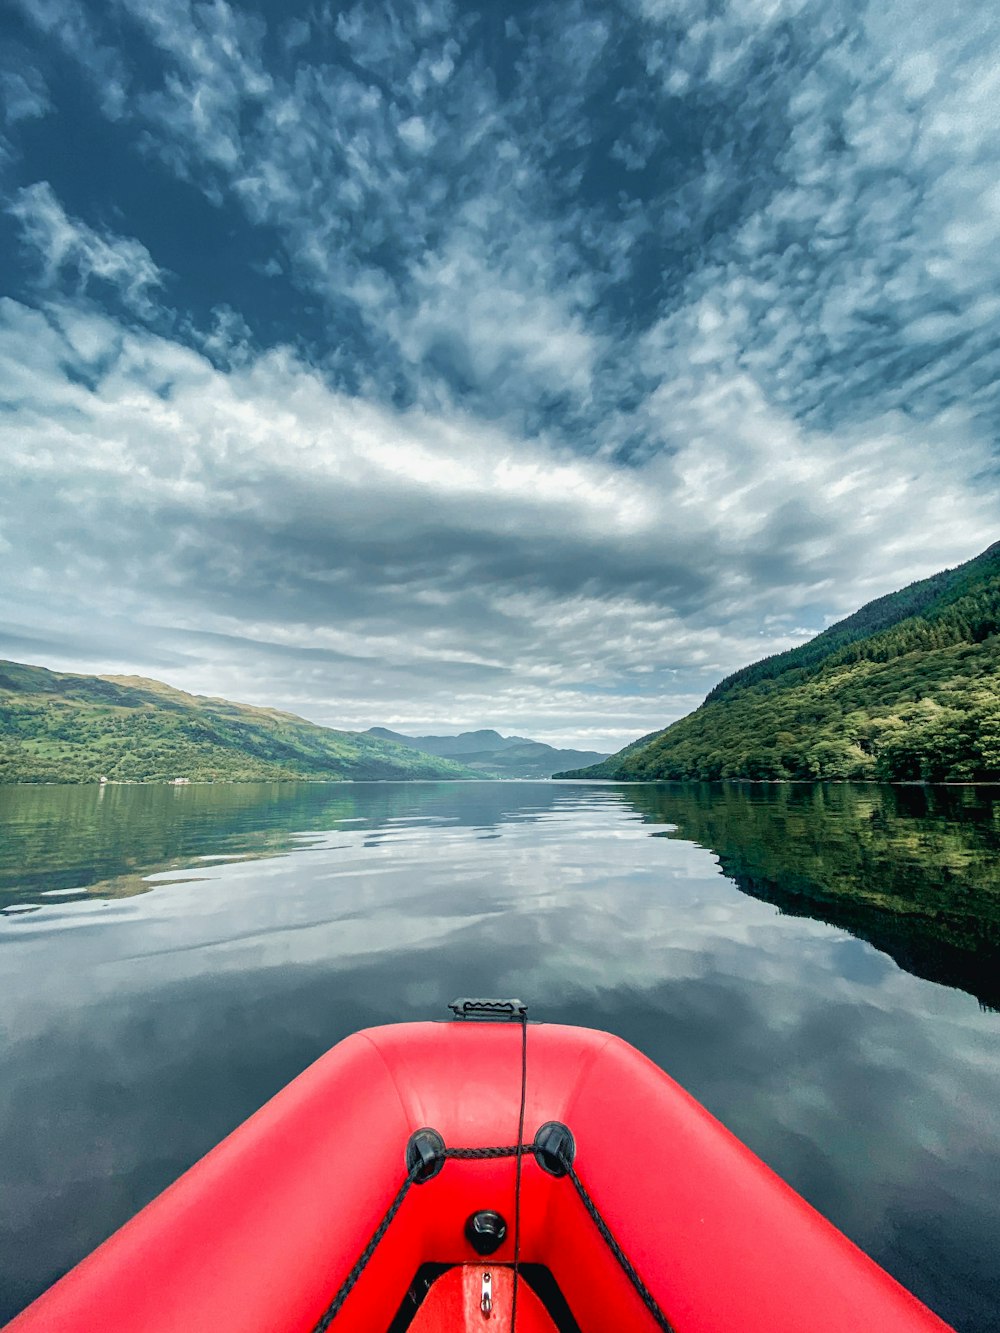 red kayak on lake near green mountains under white clouds and blue sky during daytime